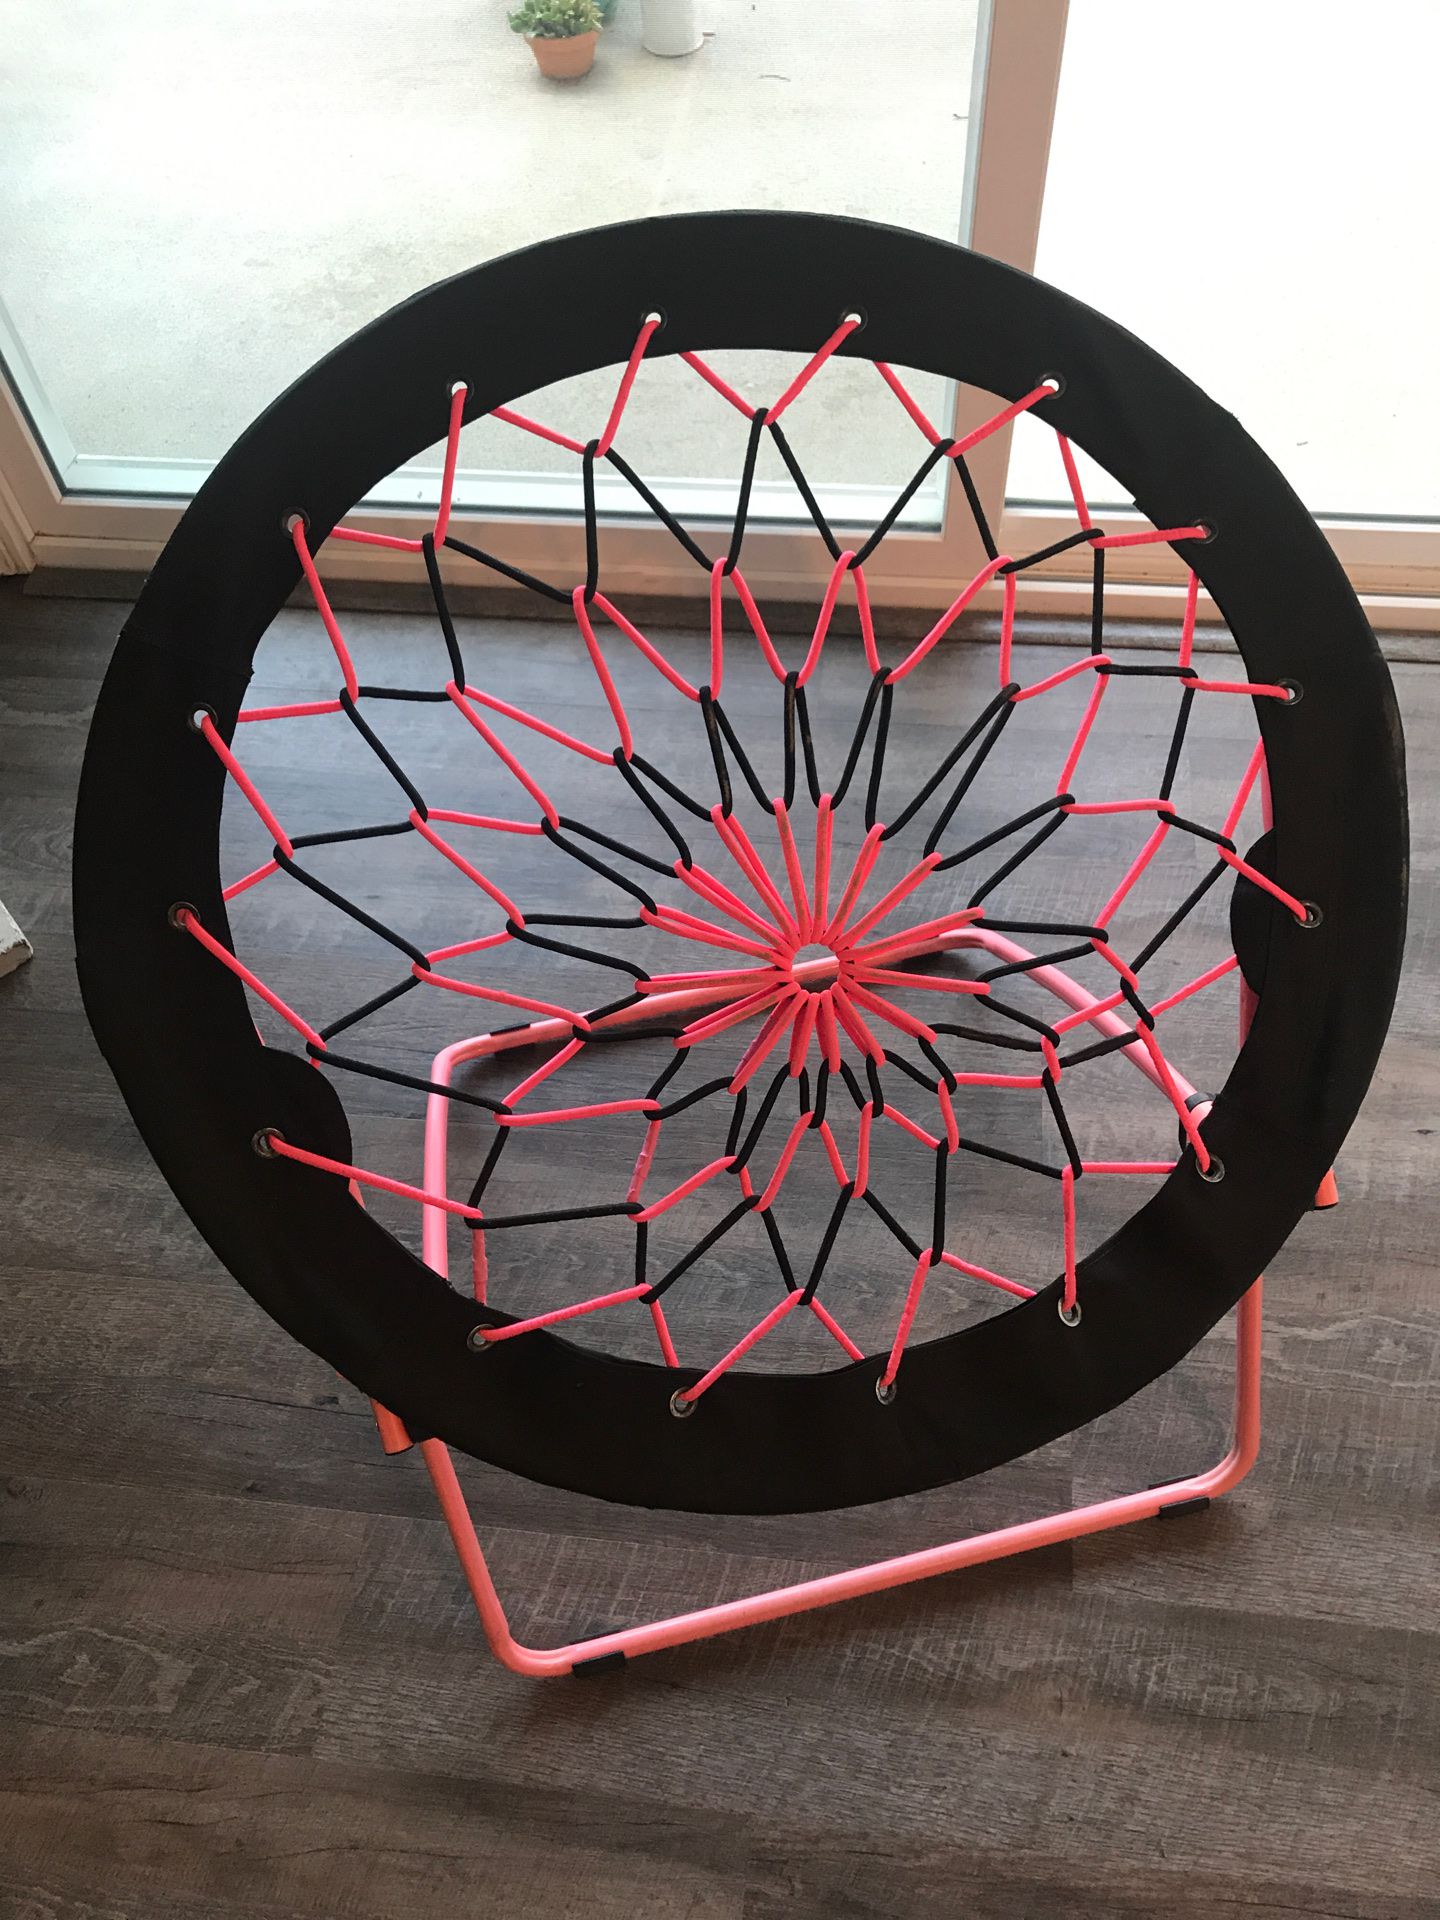 Bungee/Trampoline Chair - Great for Kids & It Folds Up!